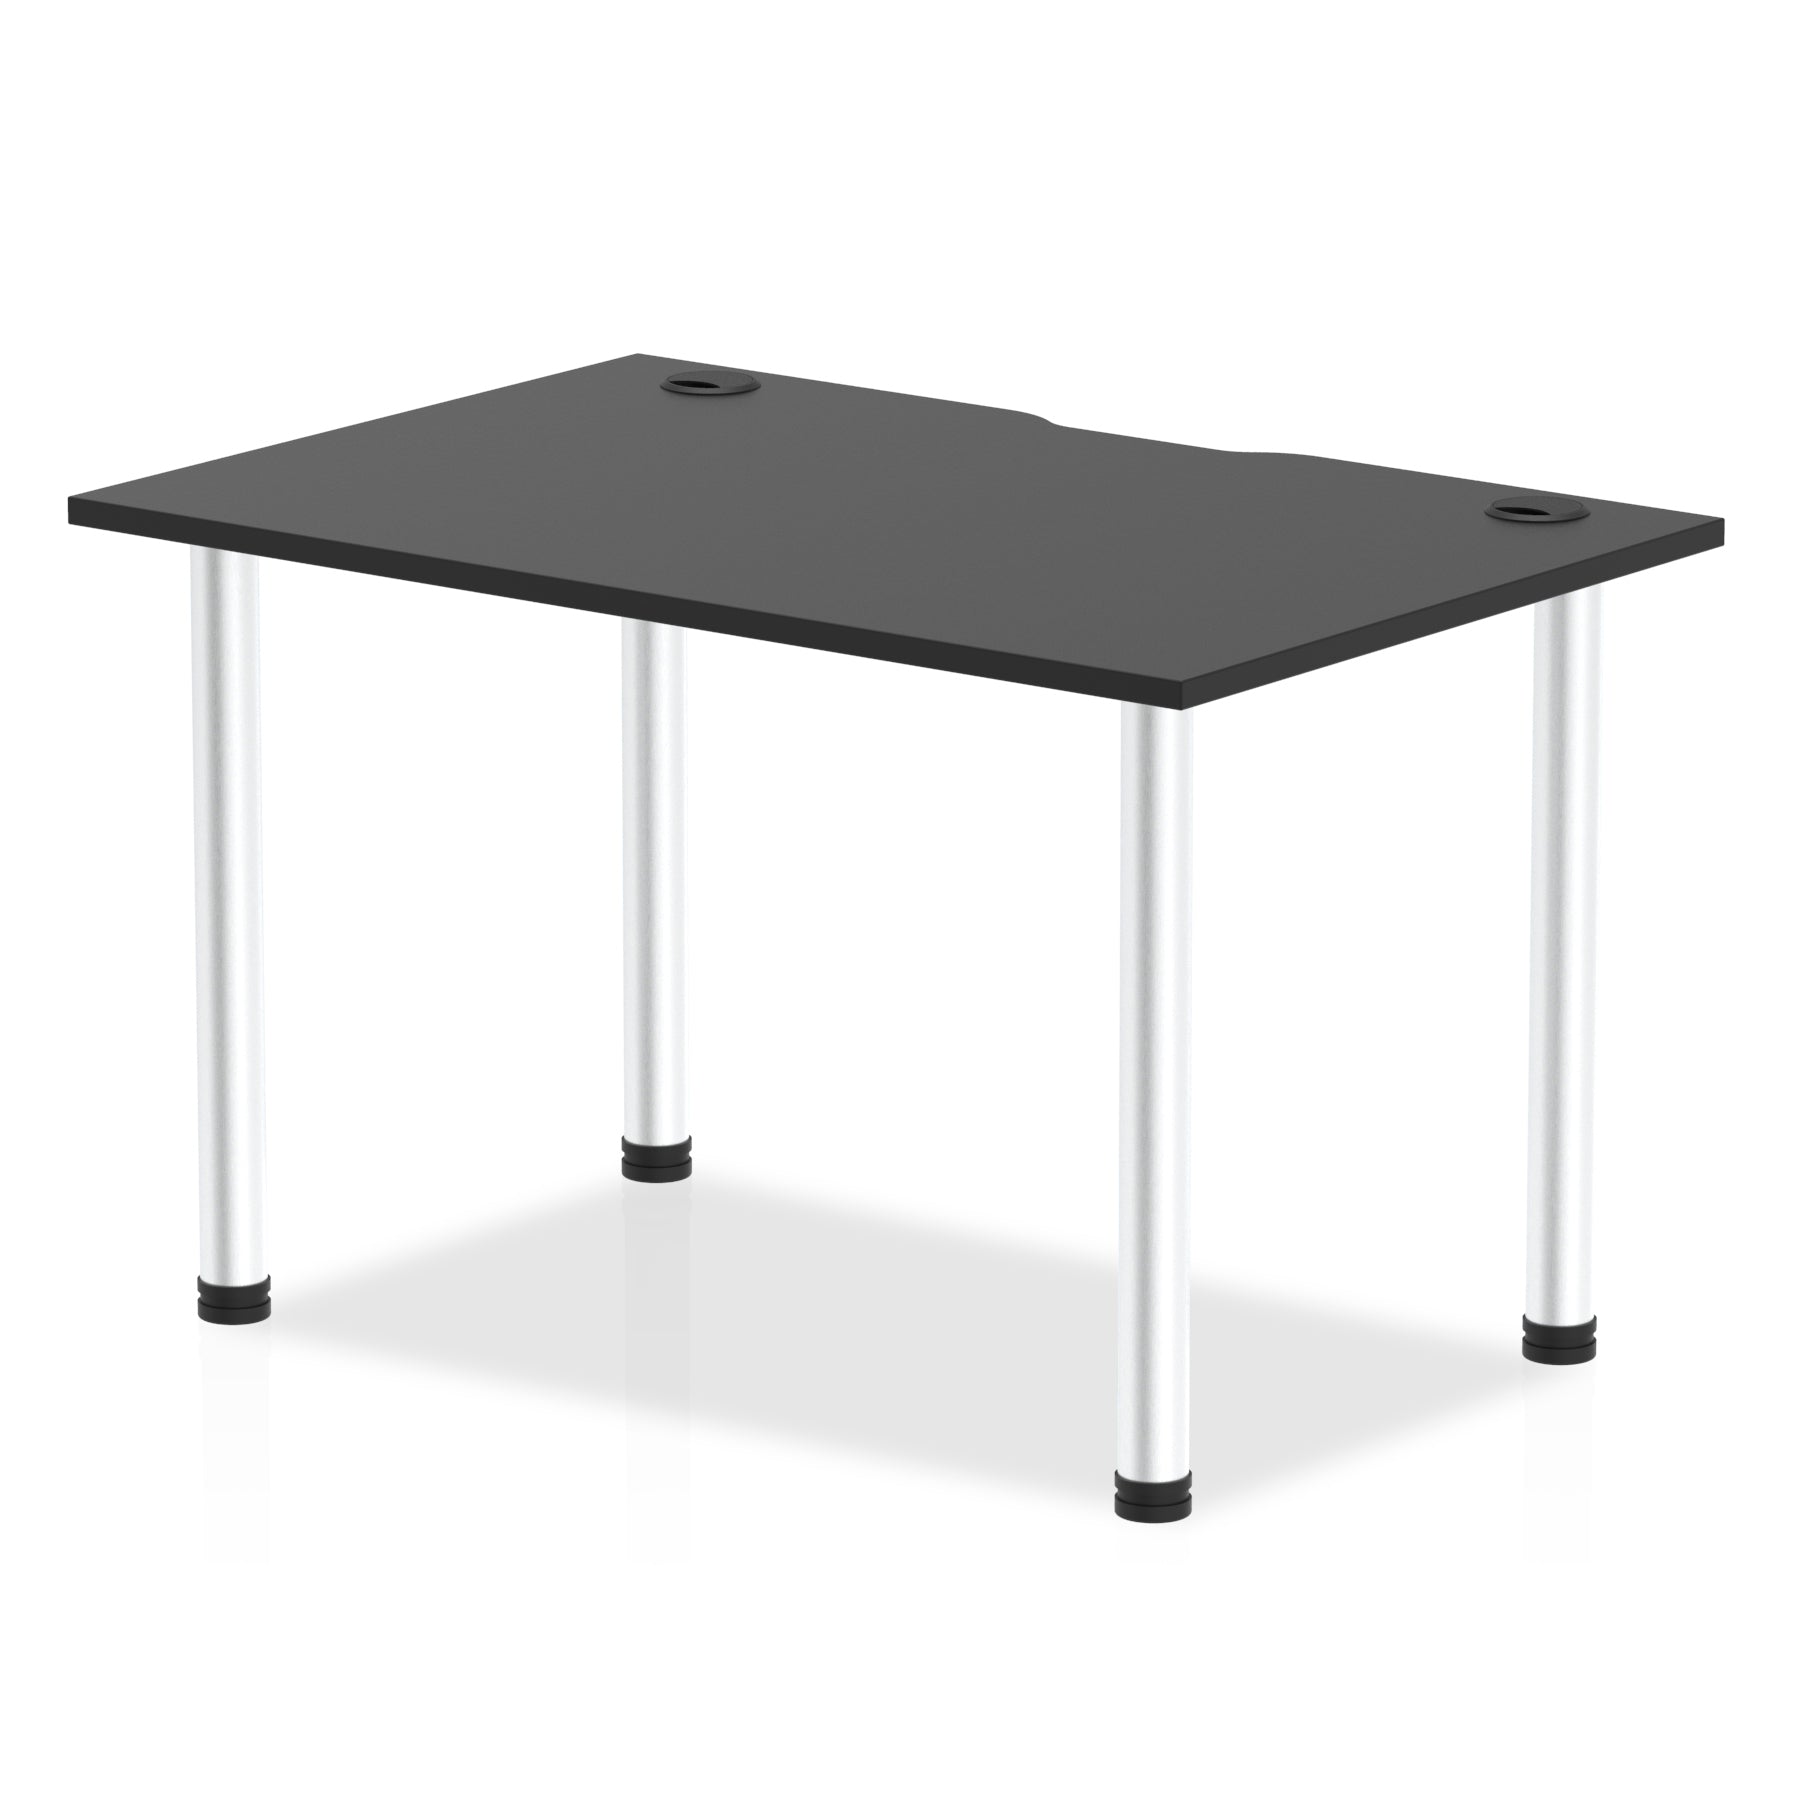 Photos - Dining Table Dynamic Office Solutions Impulse Black Series Straight Table I004232 